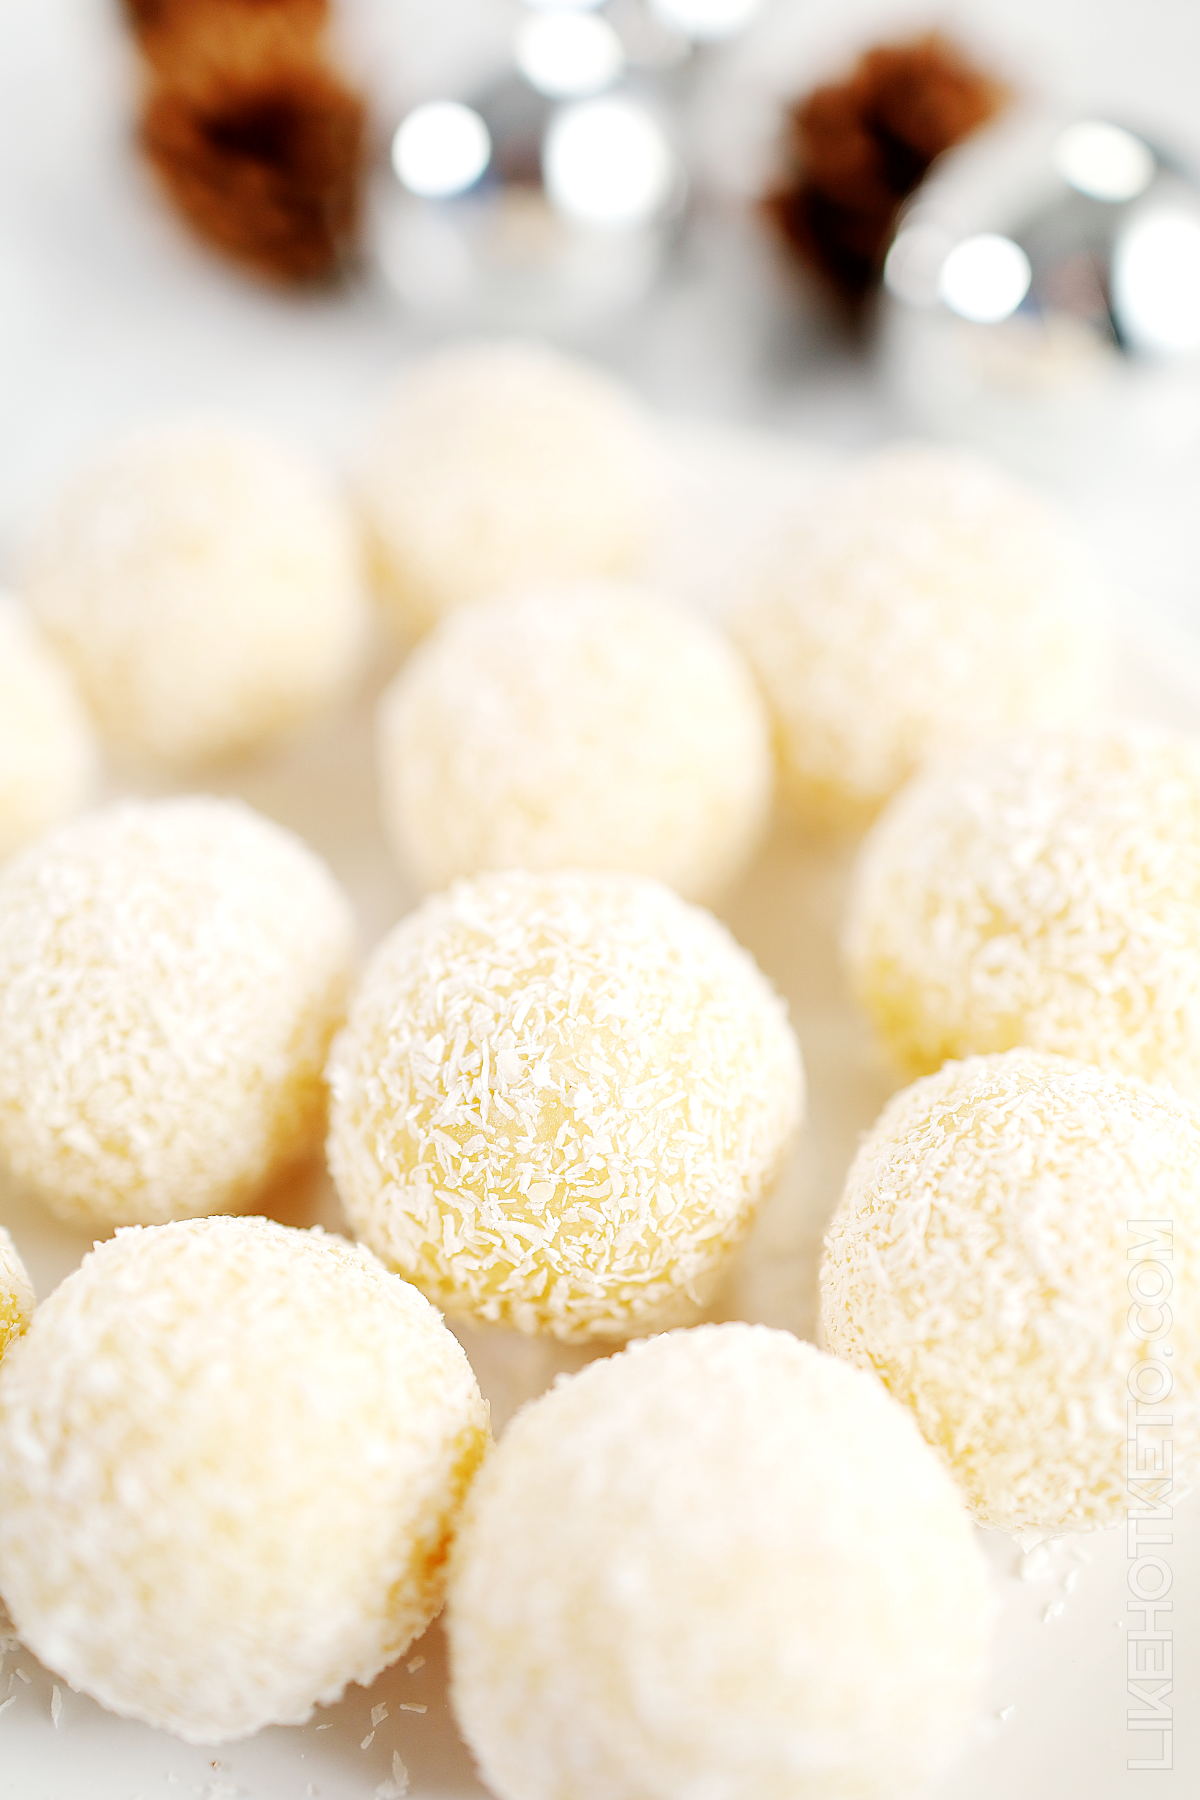 A plate full of no-bake snowball truffles with festive decoration in the background.